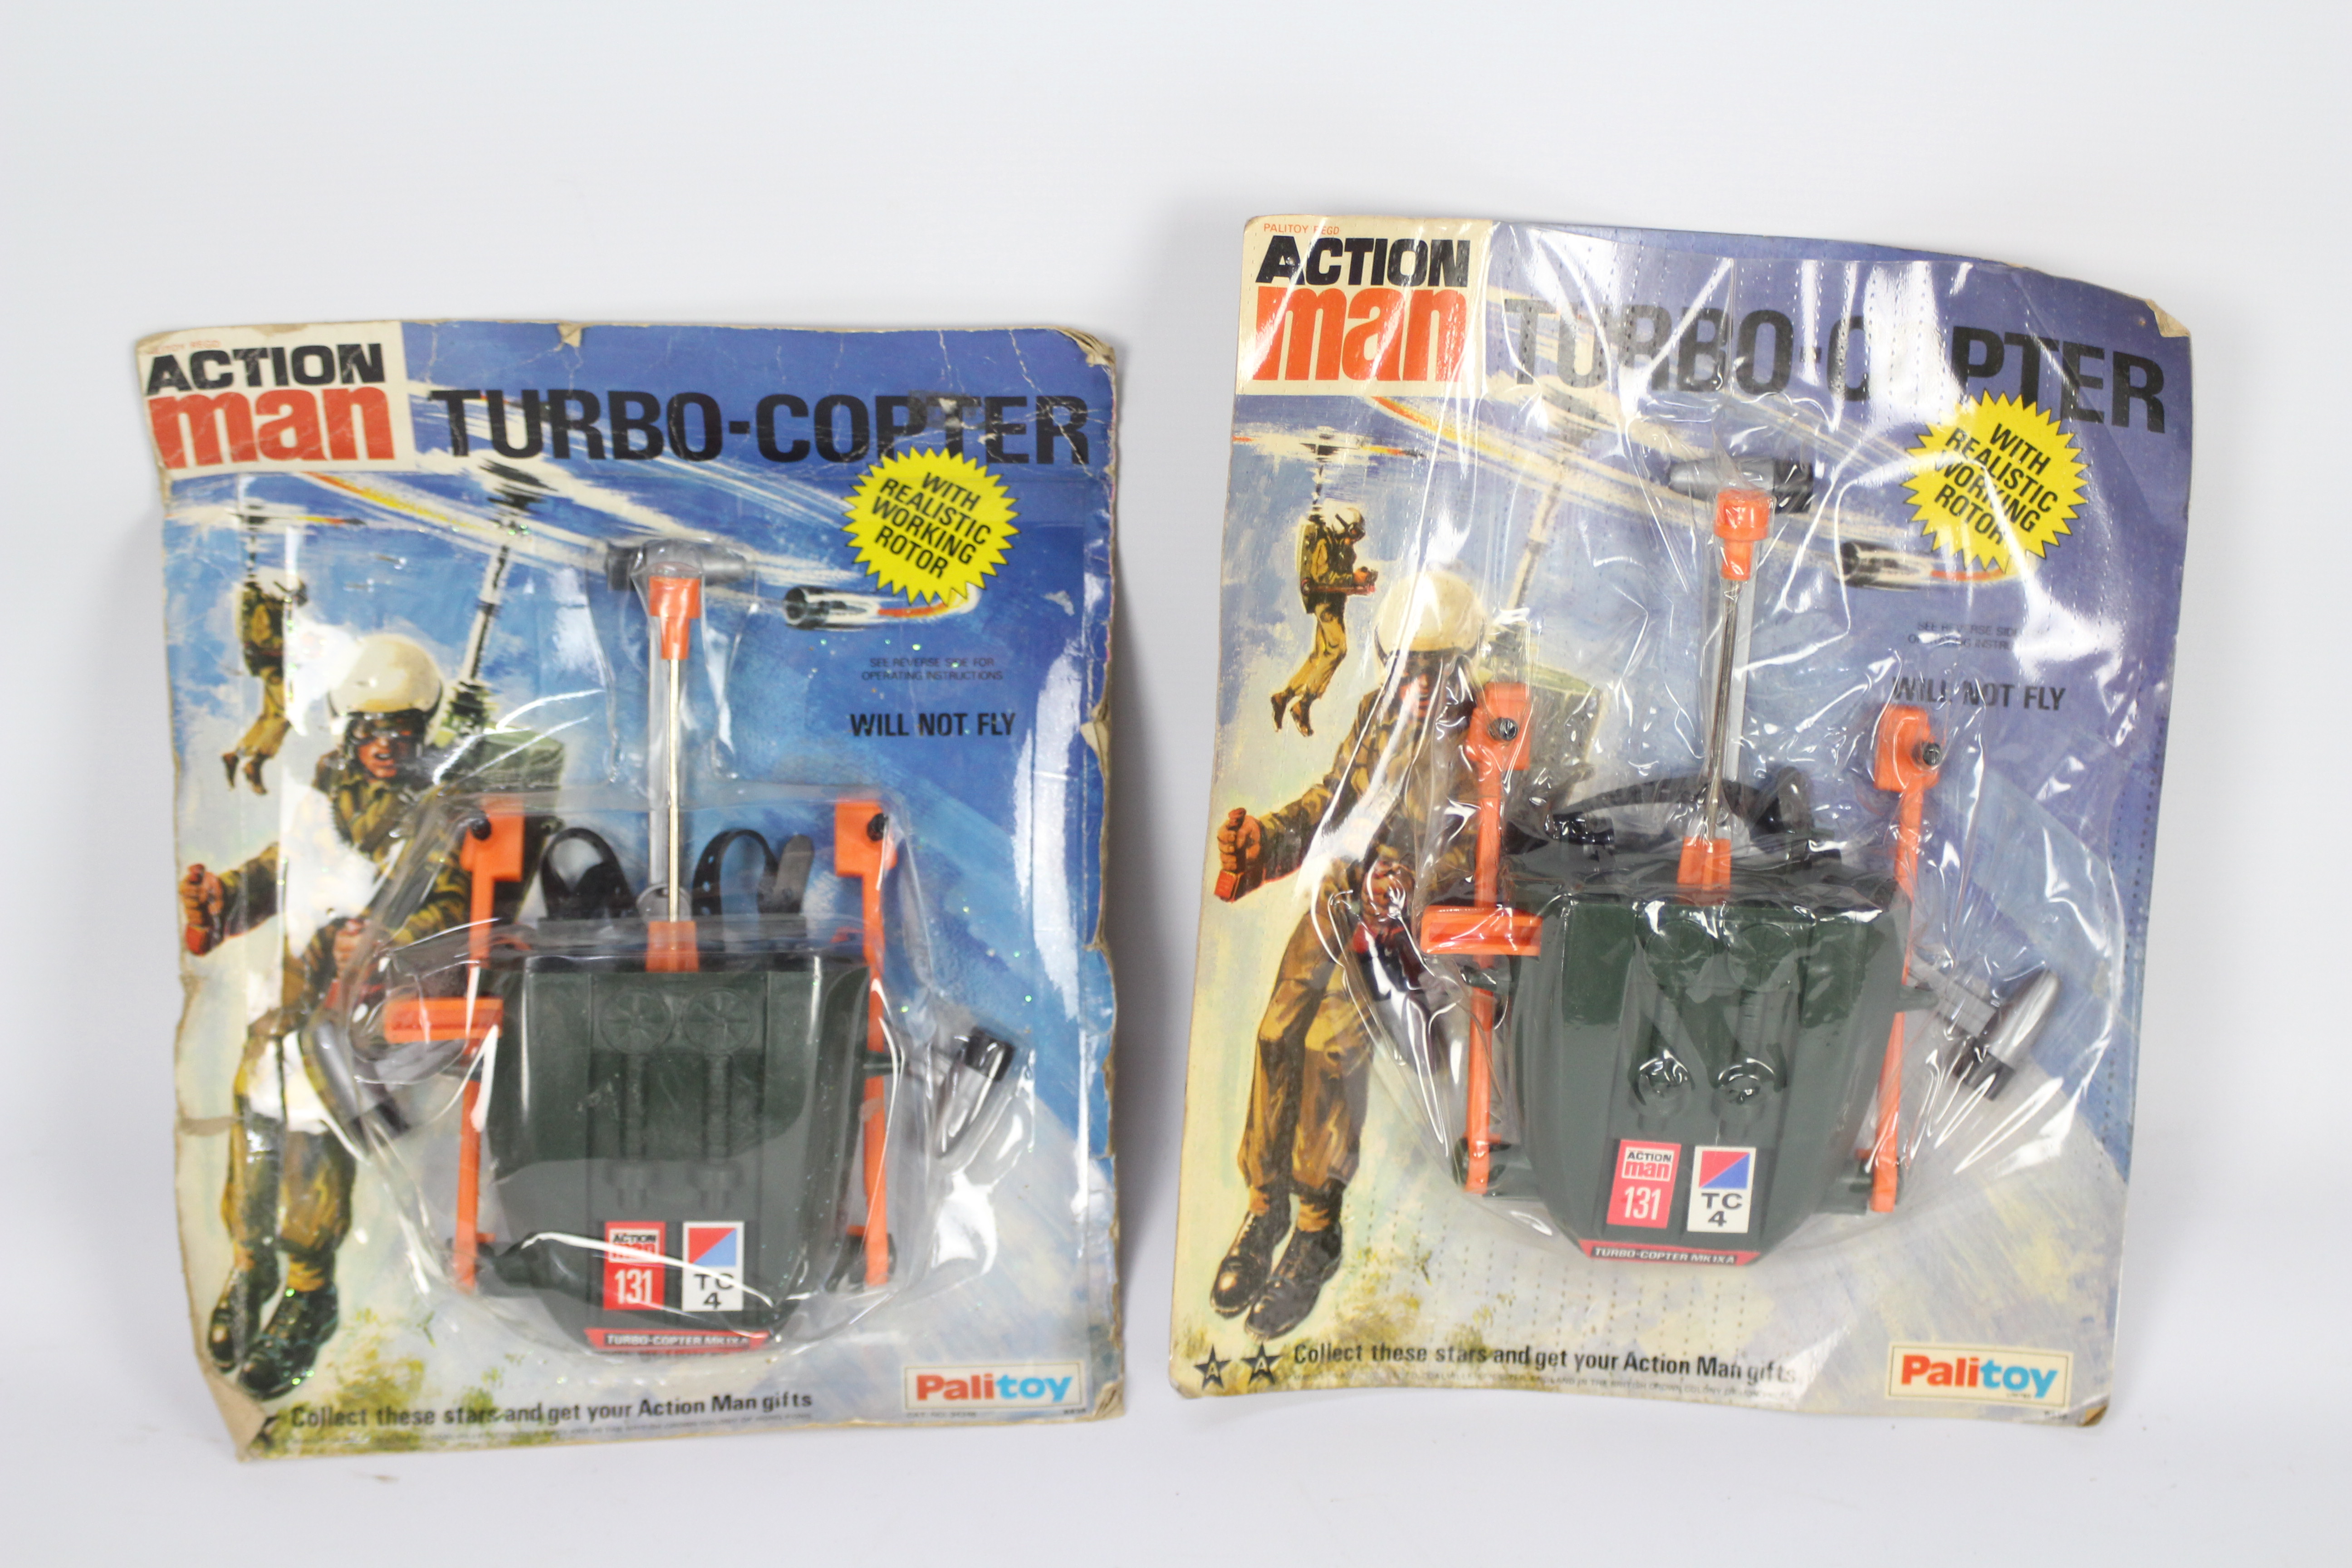 Palitoy, Action Man - Two carded Palitoy Action Man Turbo Copters.